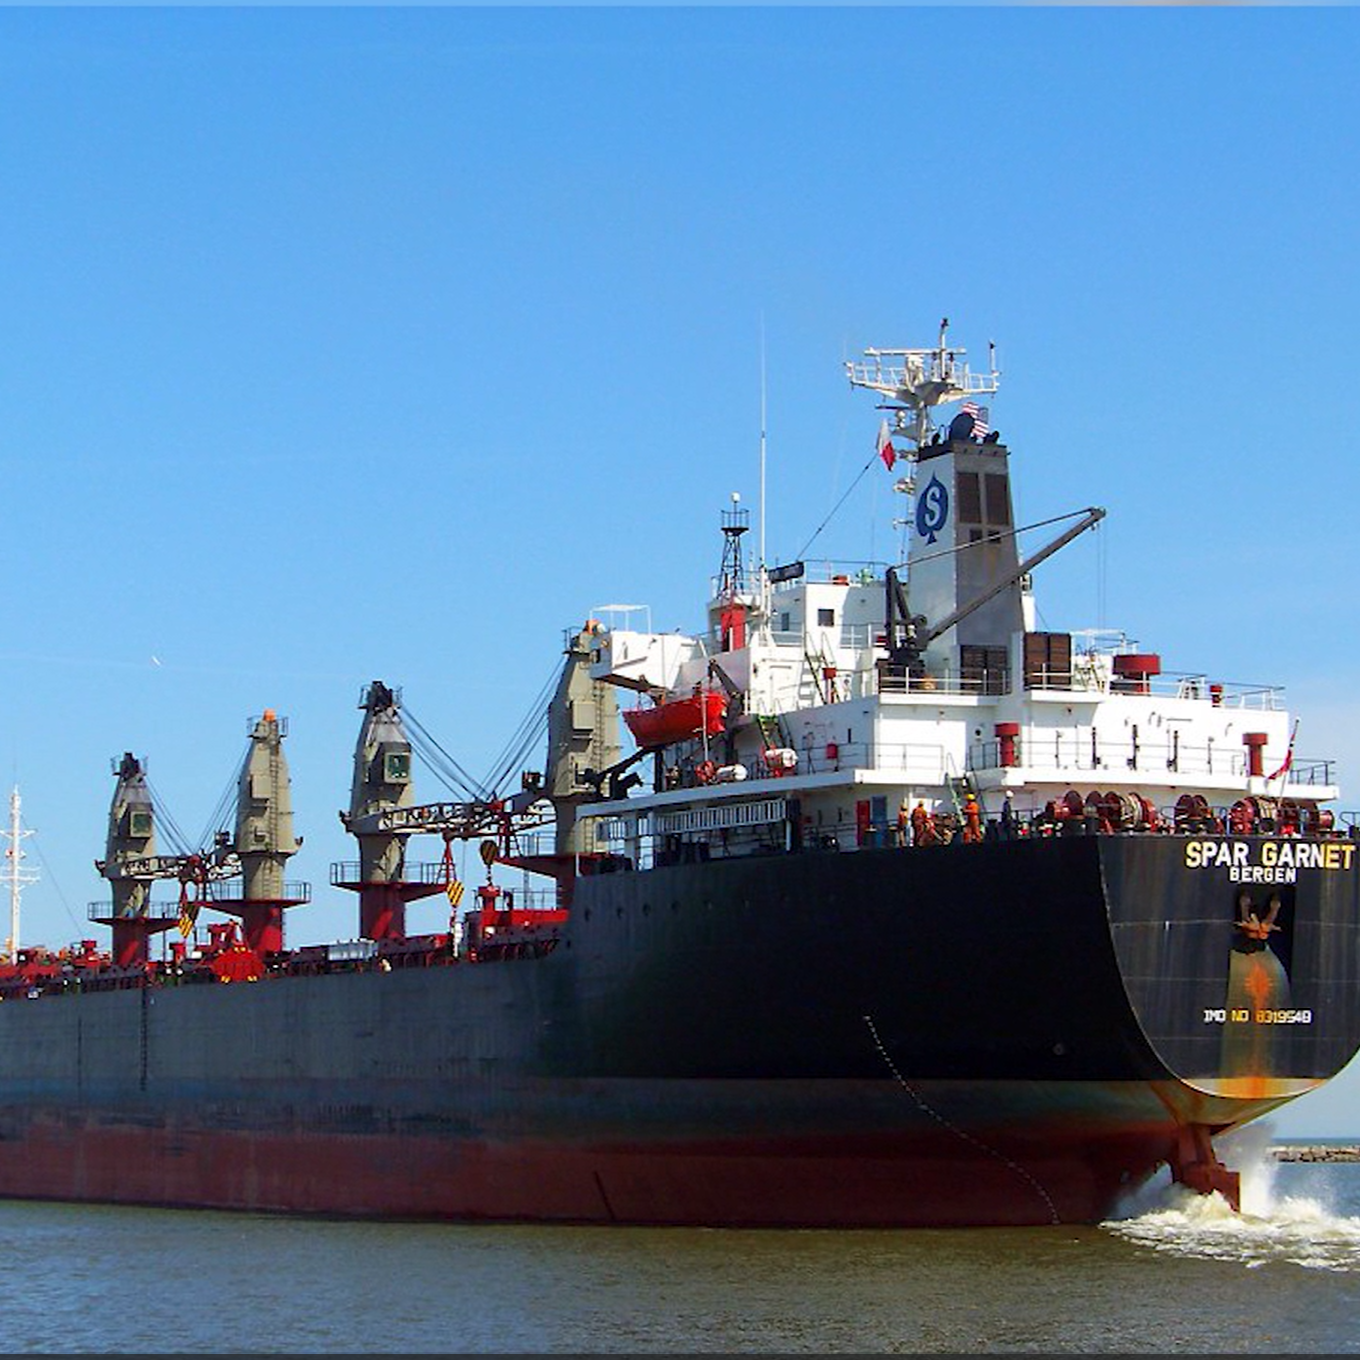 Calling All Freighter Nerds – Downriver the new destination for this cool observational activity.